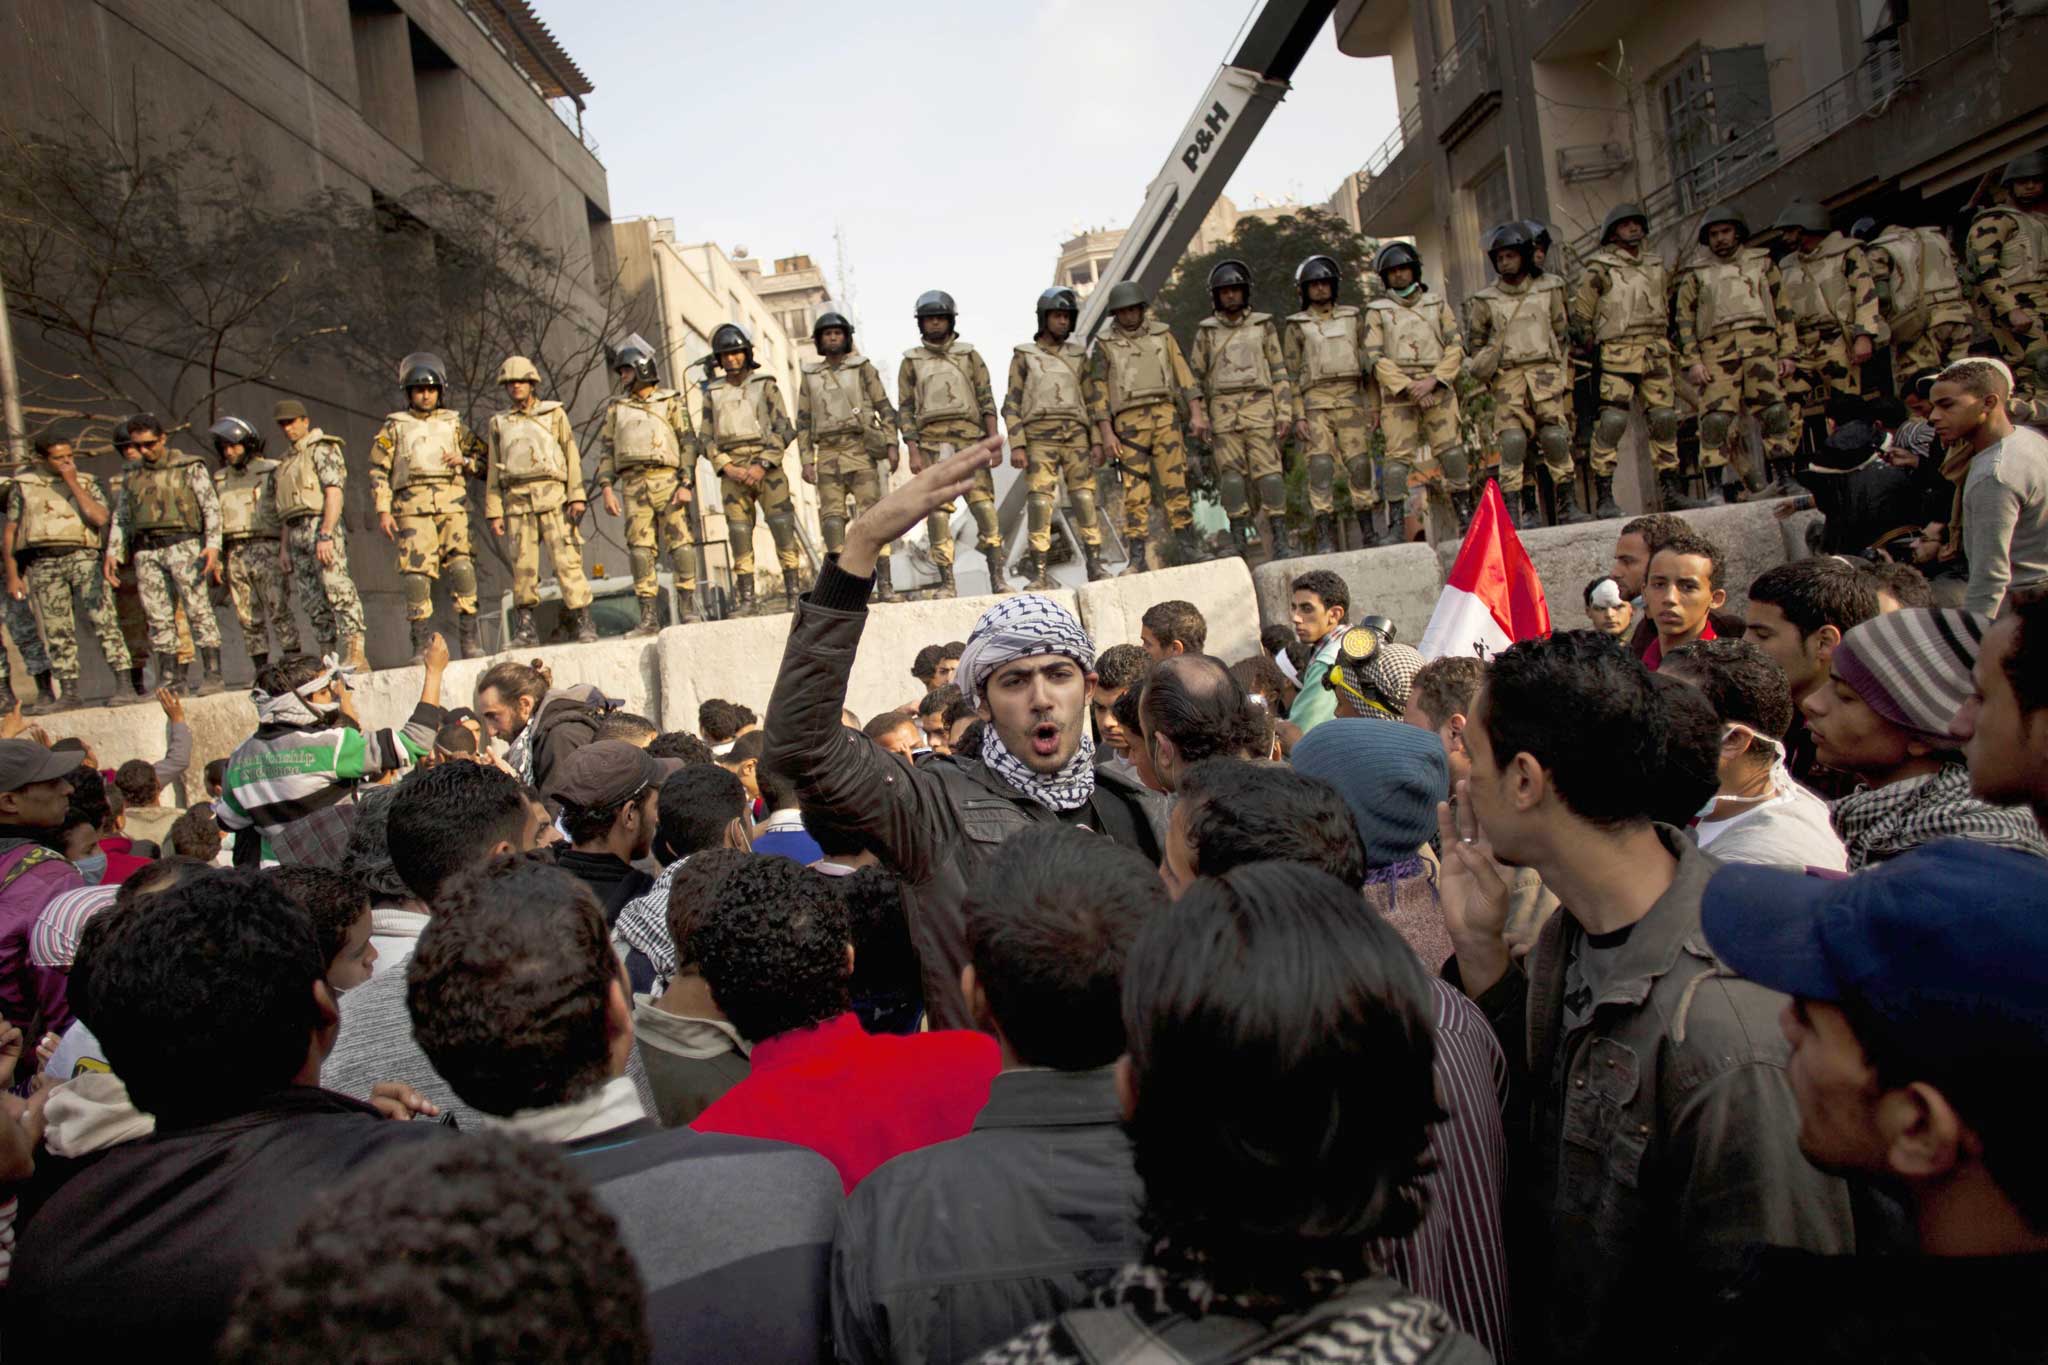 Wrestling with established opinion and their consciences: a stand-off in Tahrir Square, Egypt, 2011